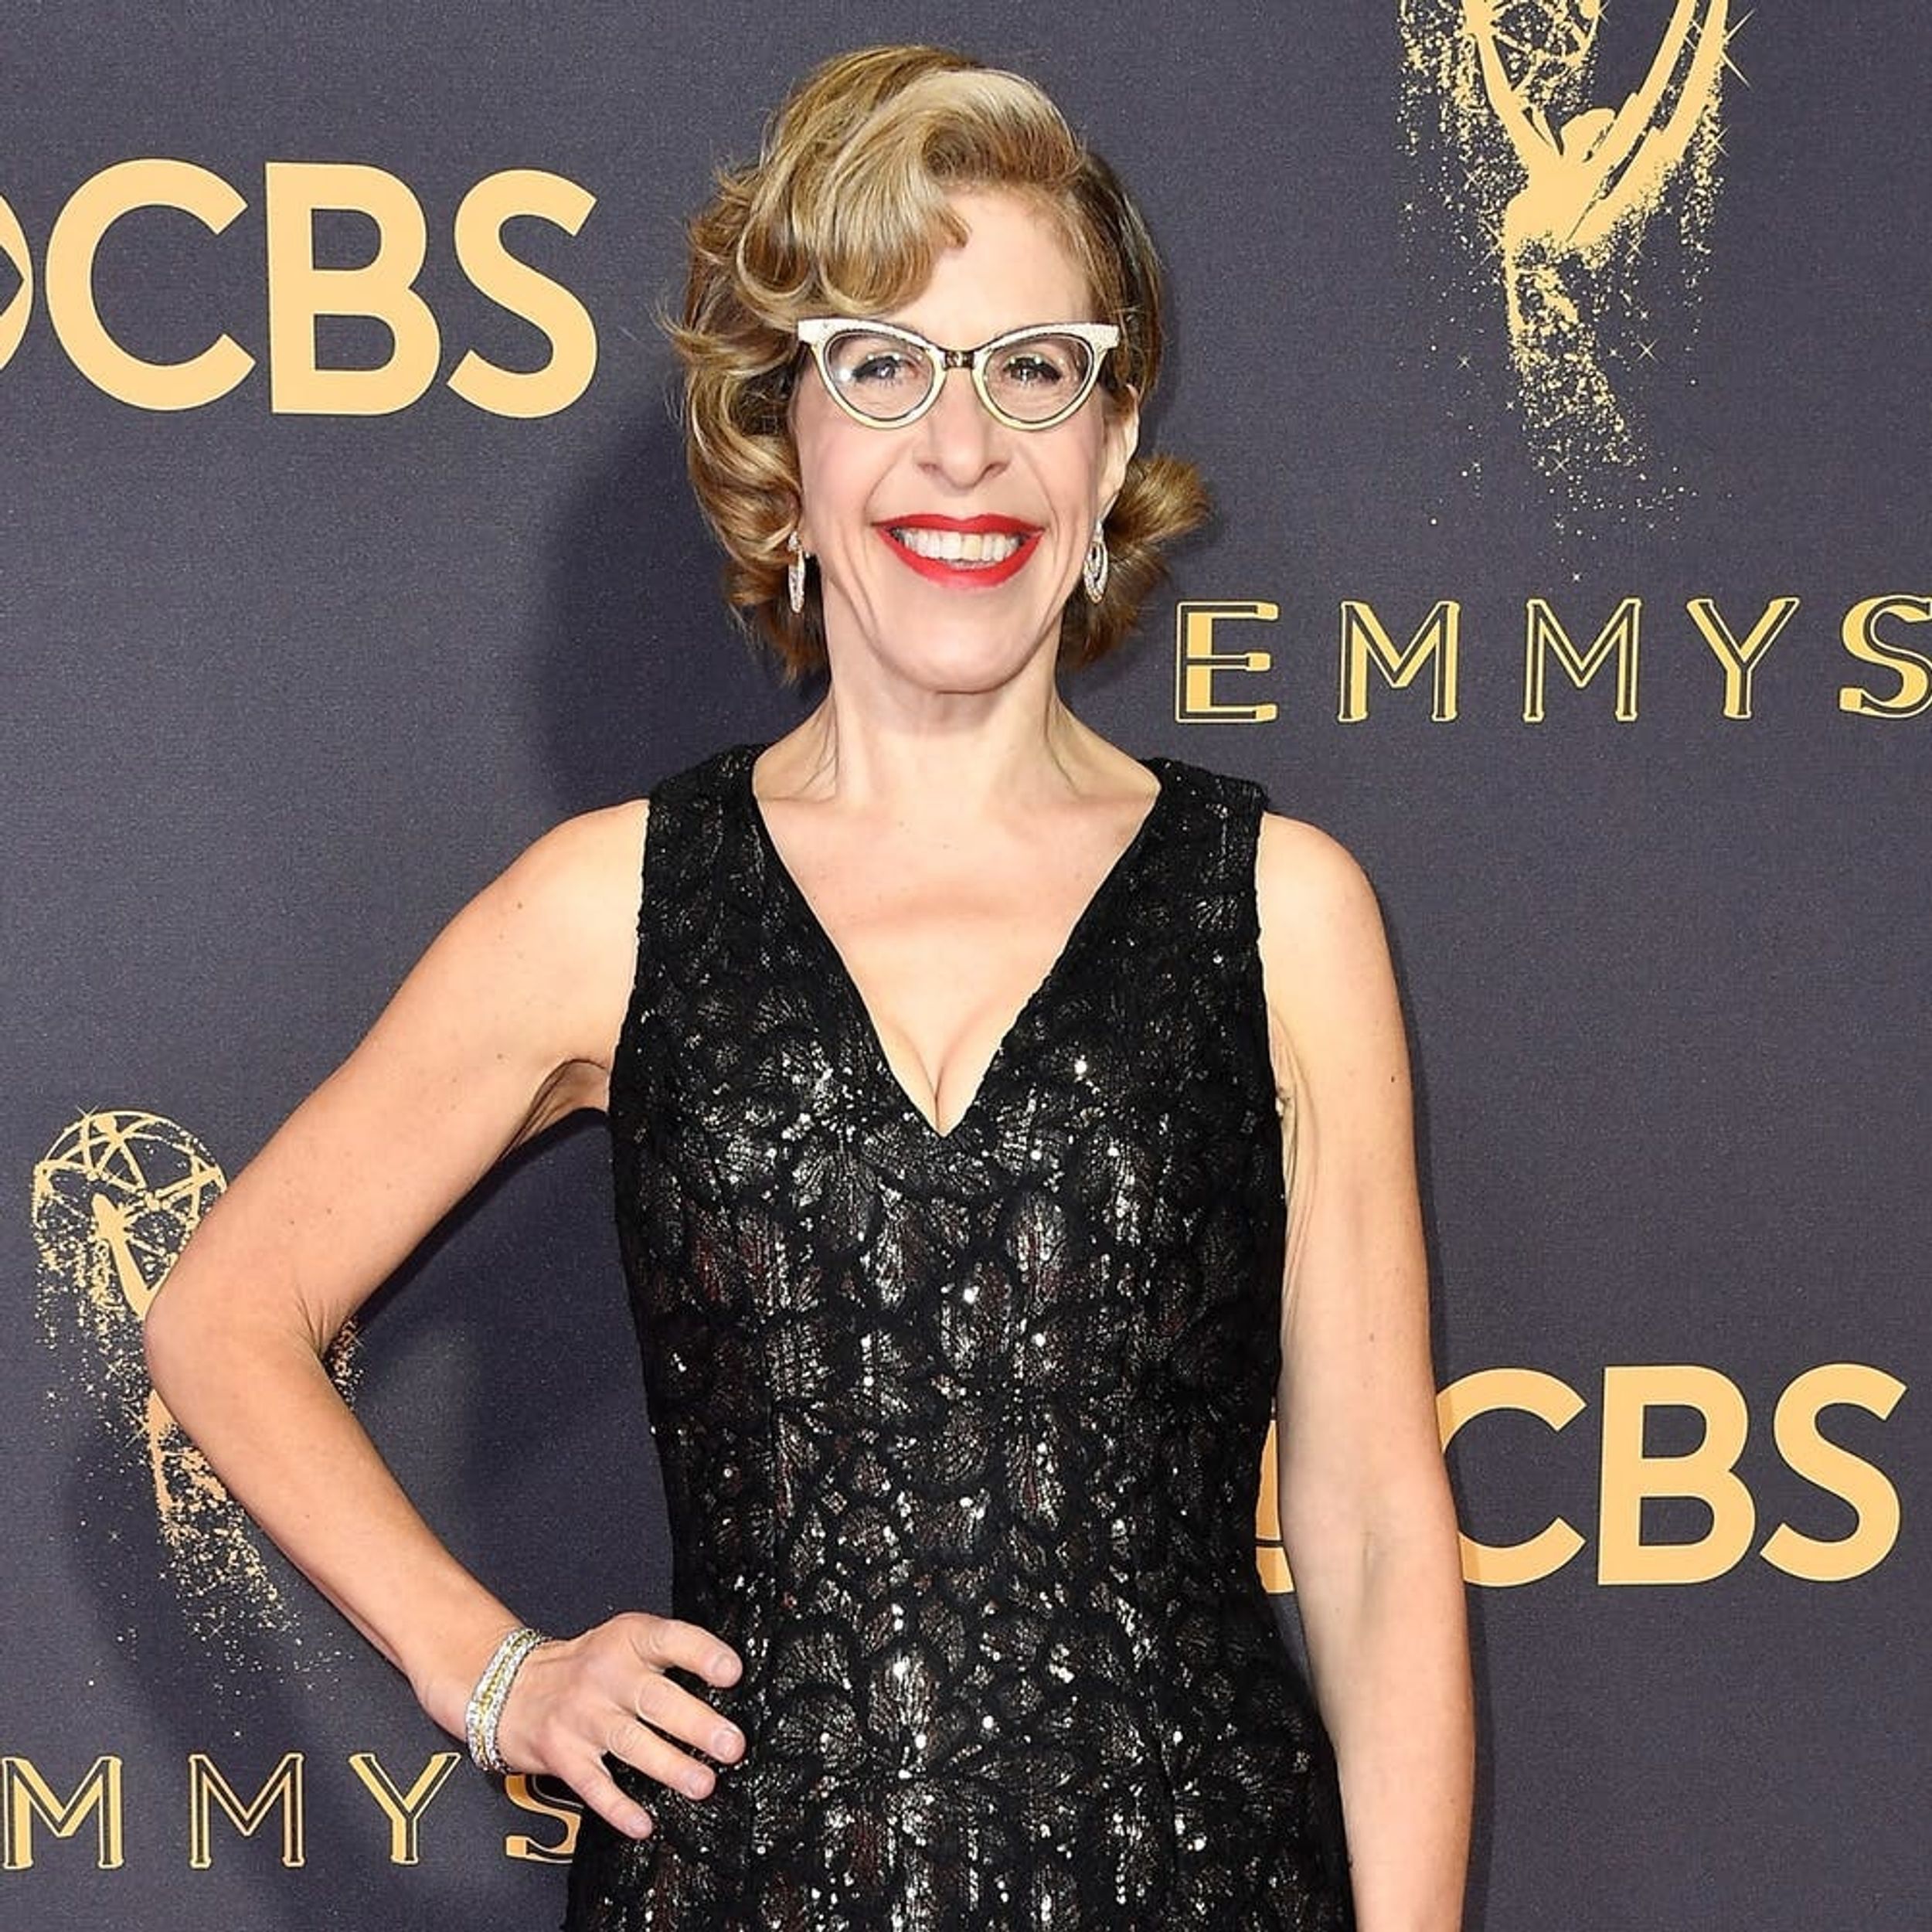 People Don’t Know What to Make of Jackie Hoffman’s Reaction to Losing the Emmy to Laura Dern